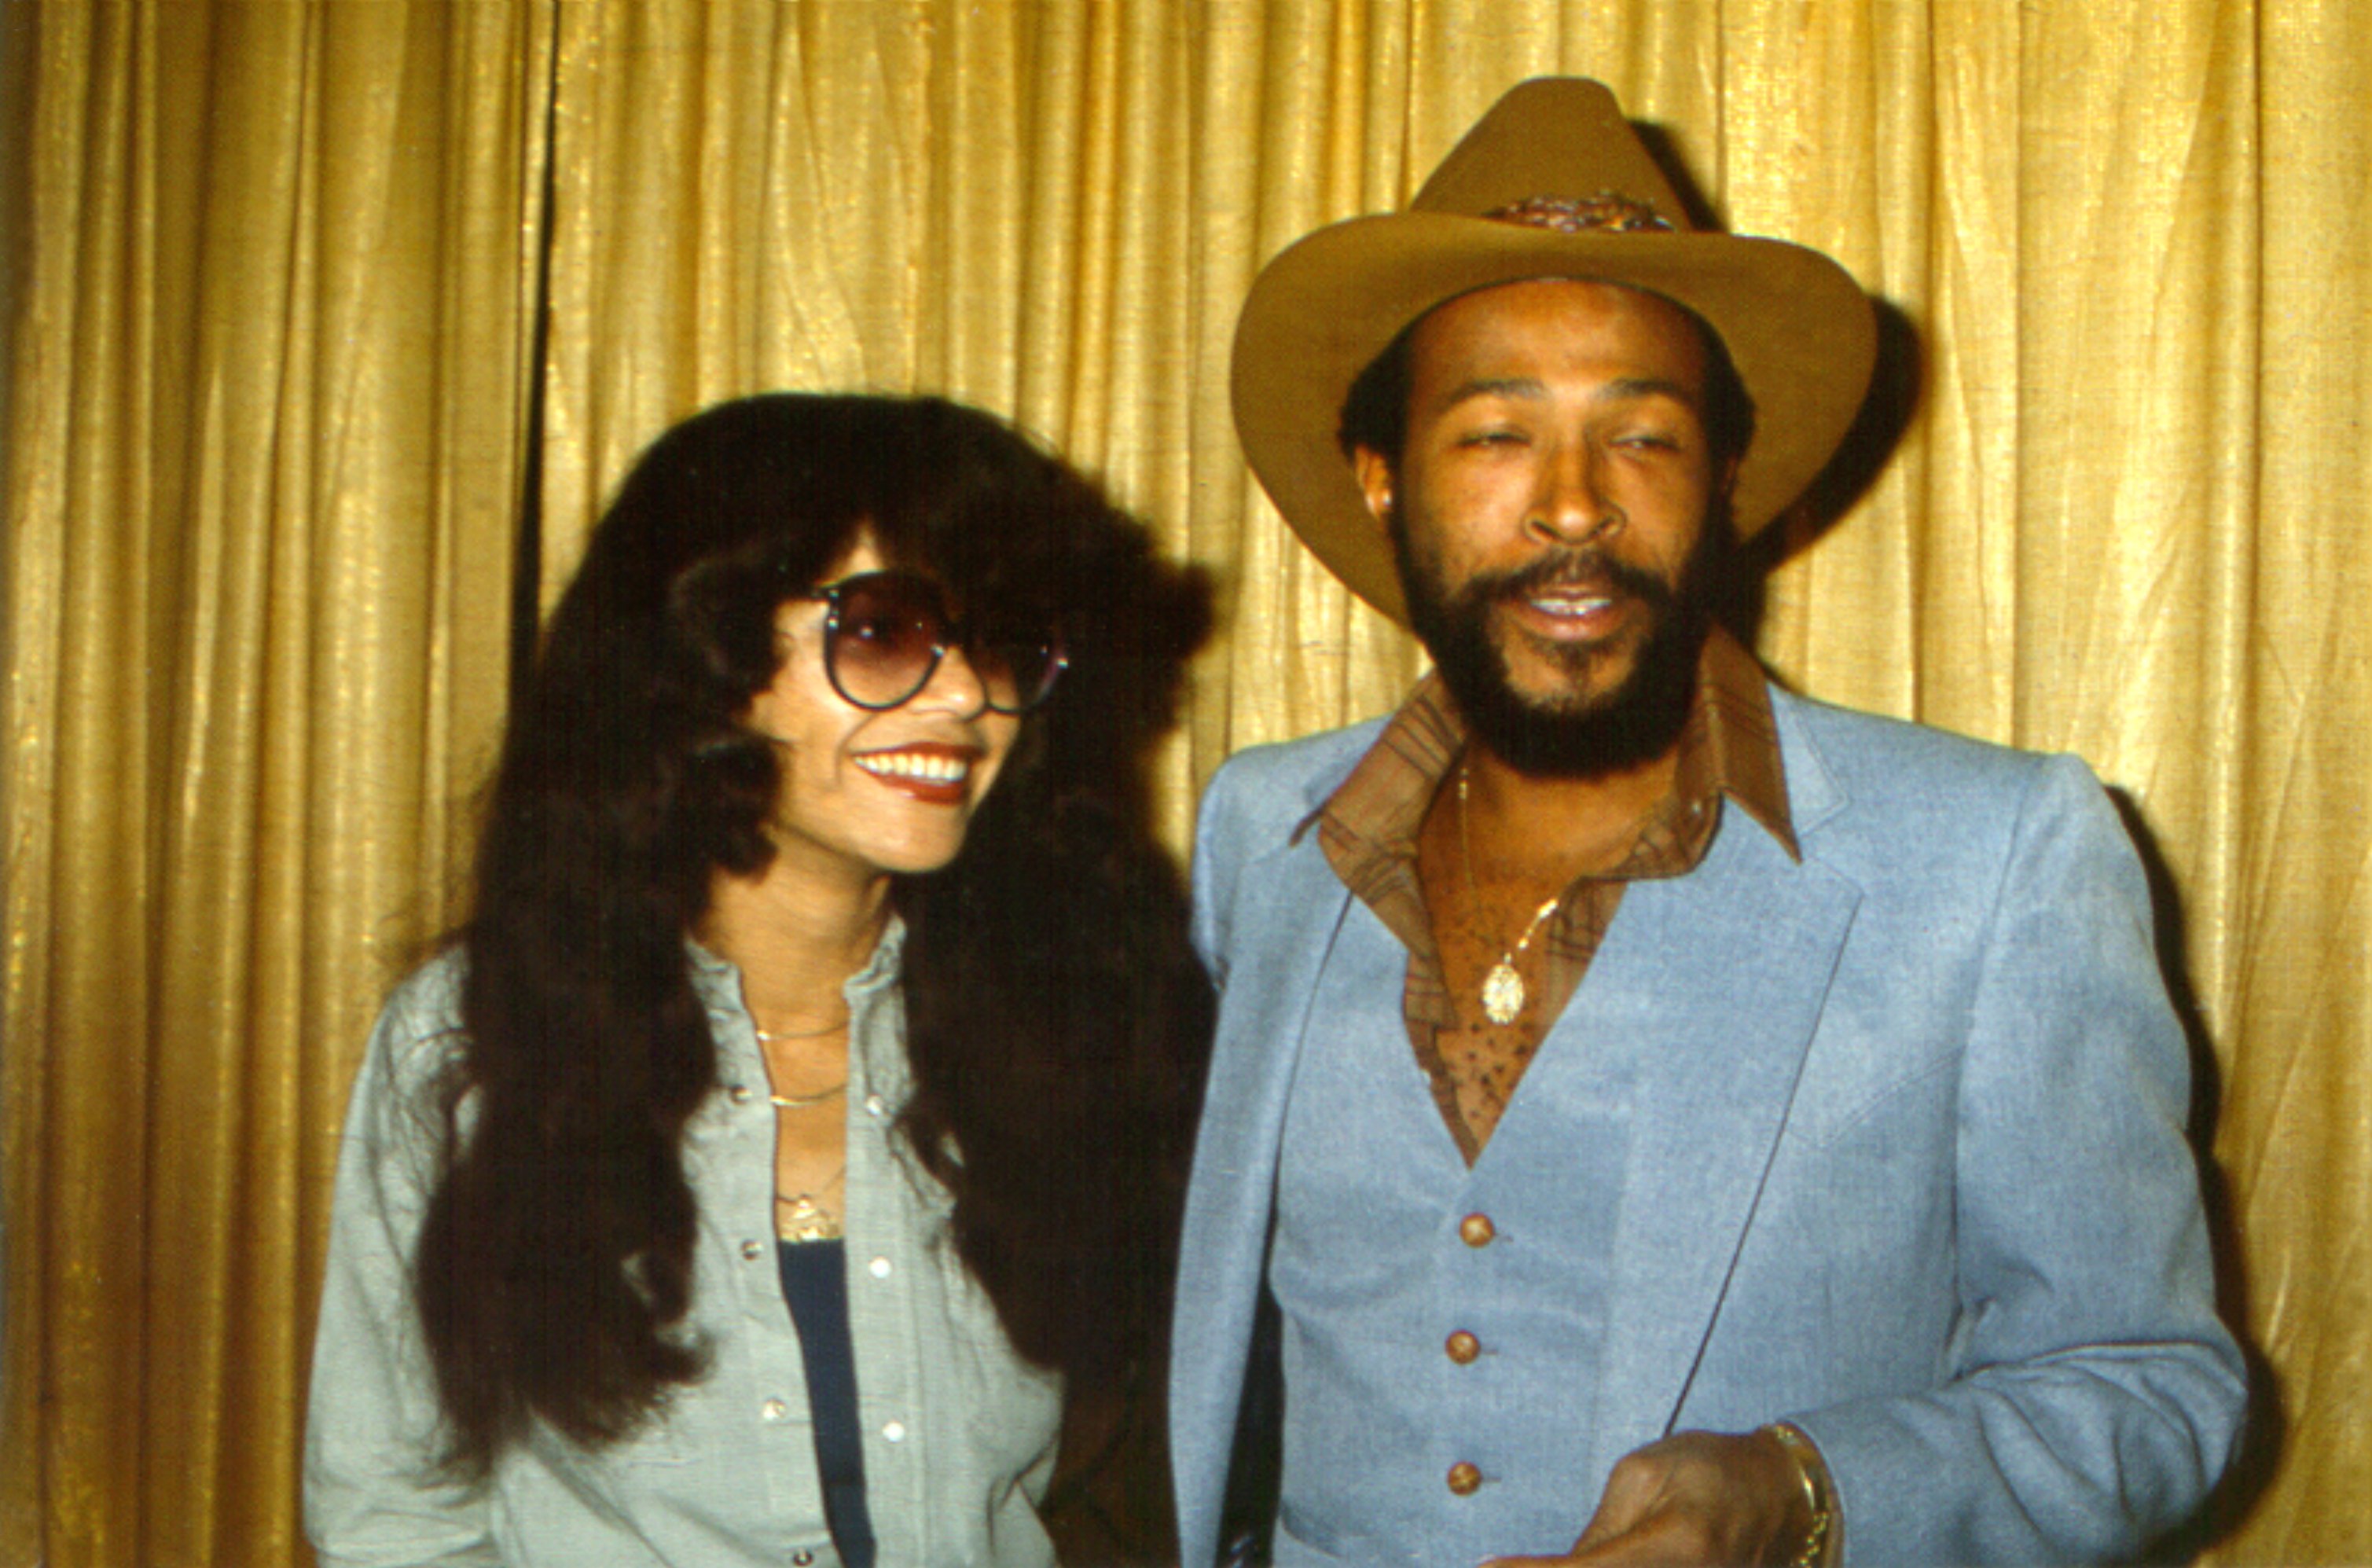 R&B singer Marvin Gaye poses for a portrait at an event with his wife Janice Gaye on October 31, Halloween, 1977 in Los Angeles, California. | Source: Getty Images